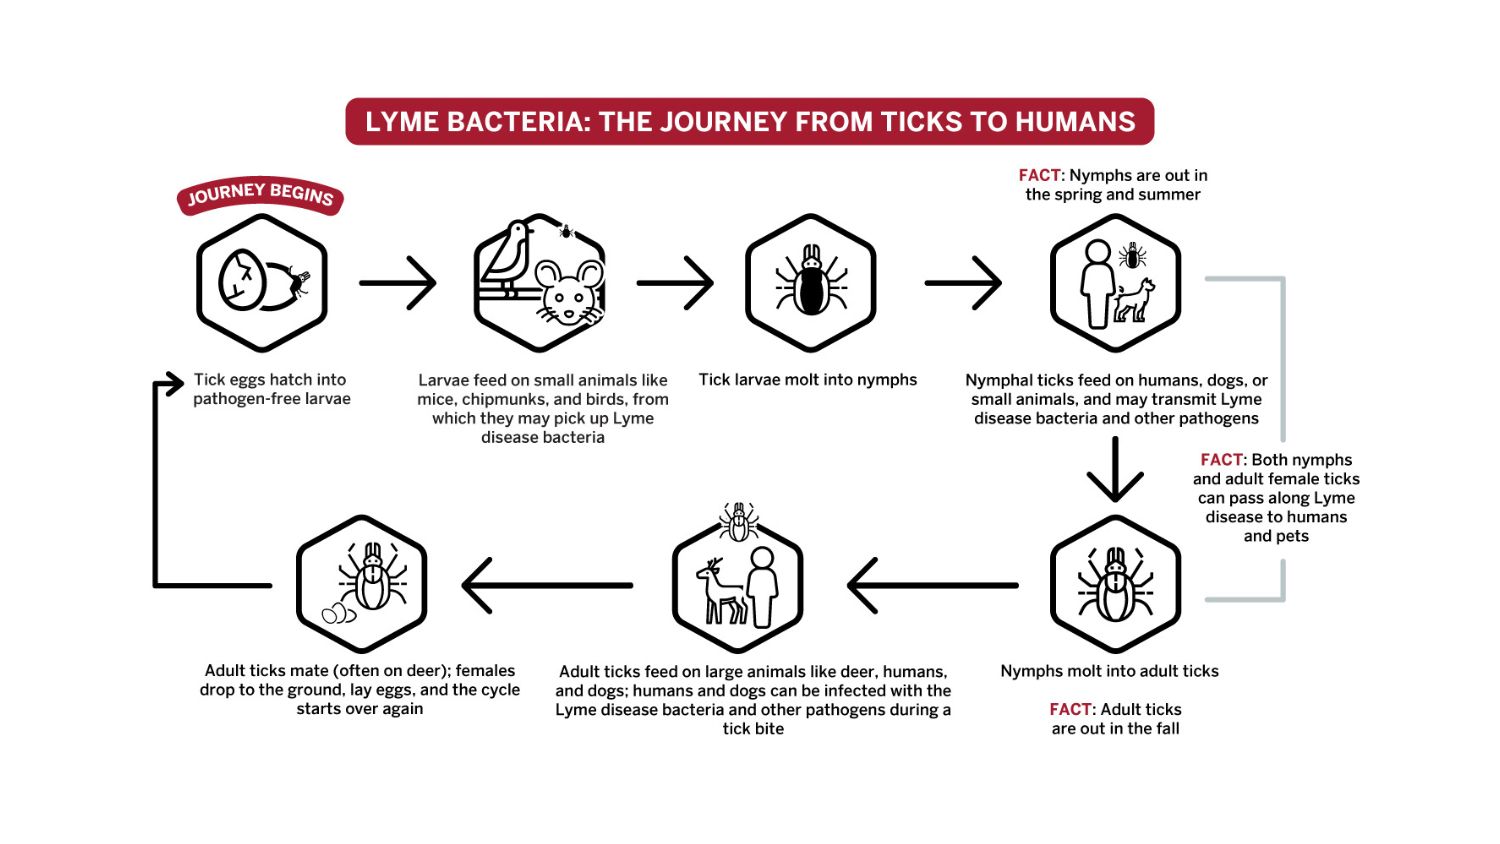 An infographic showing the lifecycle of Lyme bacteria on their journey from ticks to humans.